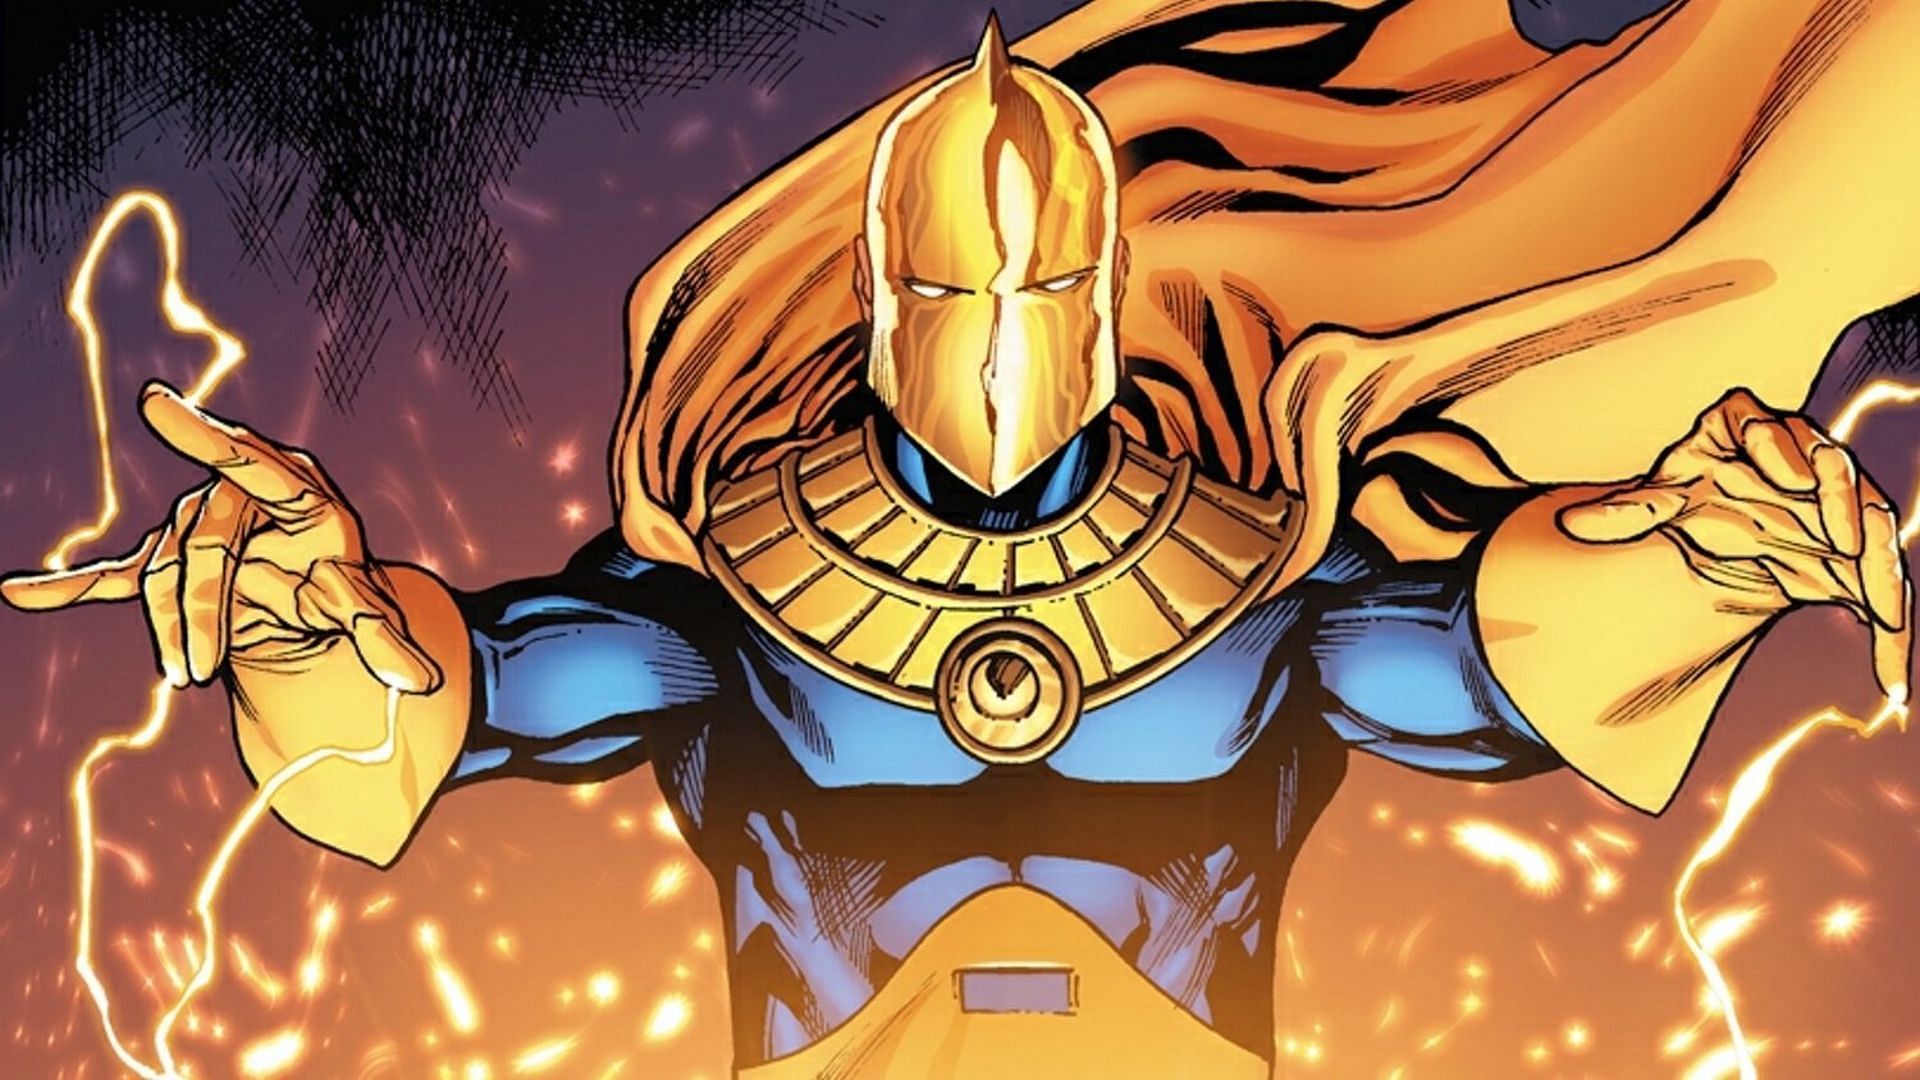 Doctor Fate will be in the new Black Adam movie (Image via DC Comics)